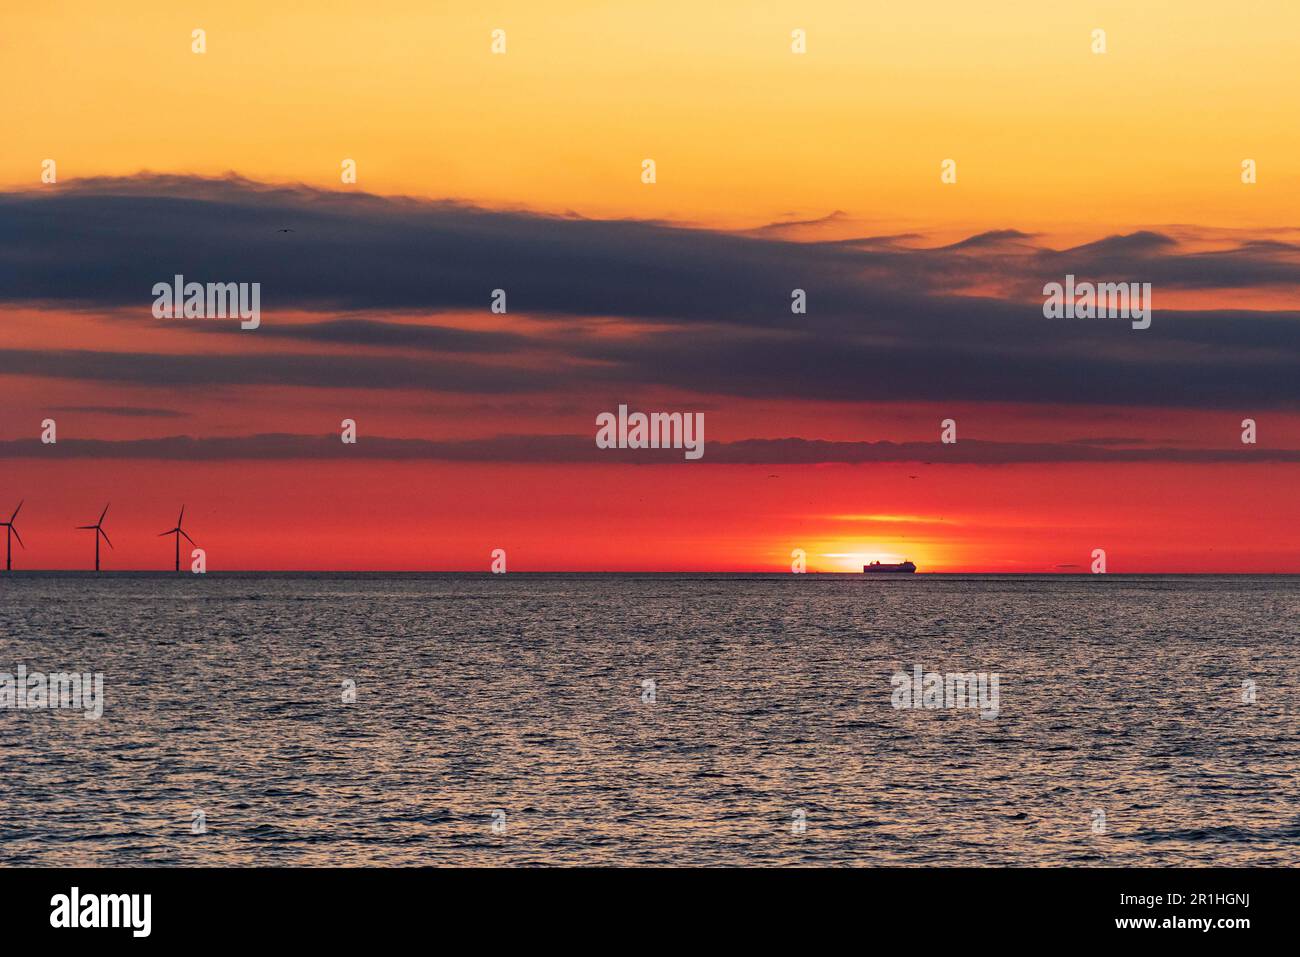 Freight ferry ship on the horizon in sunset across the waves. Stock Photo